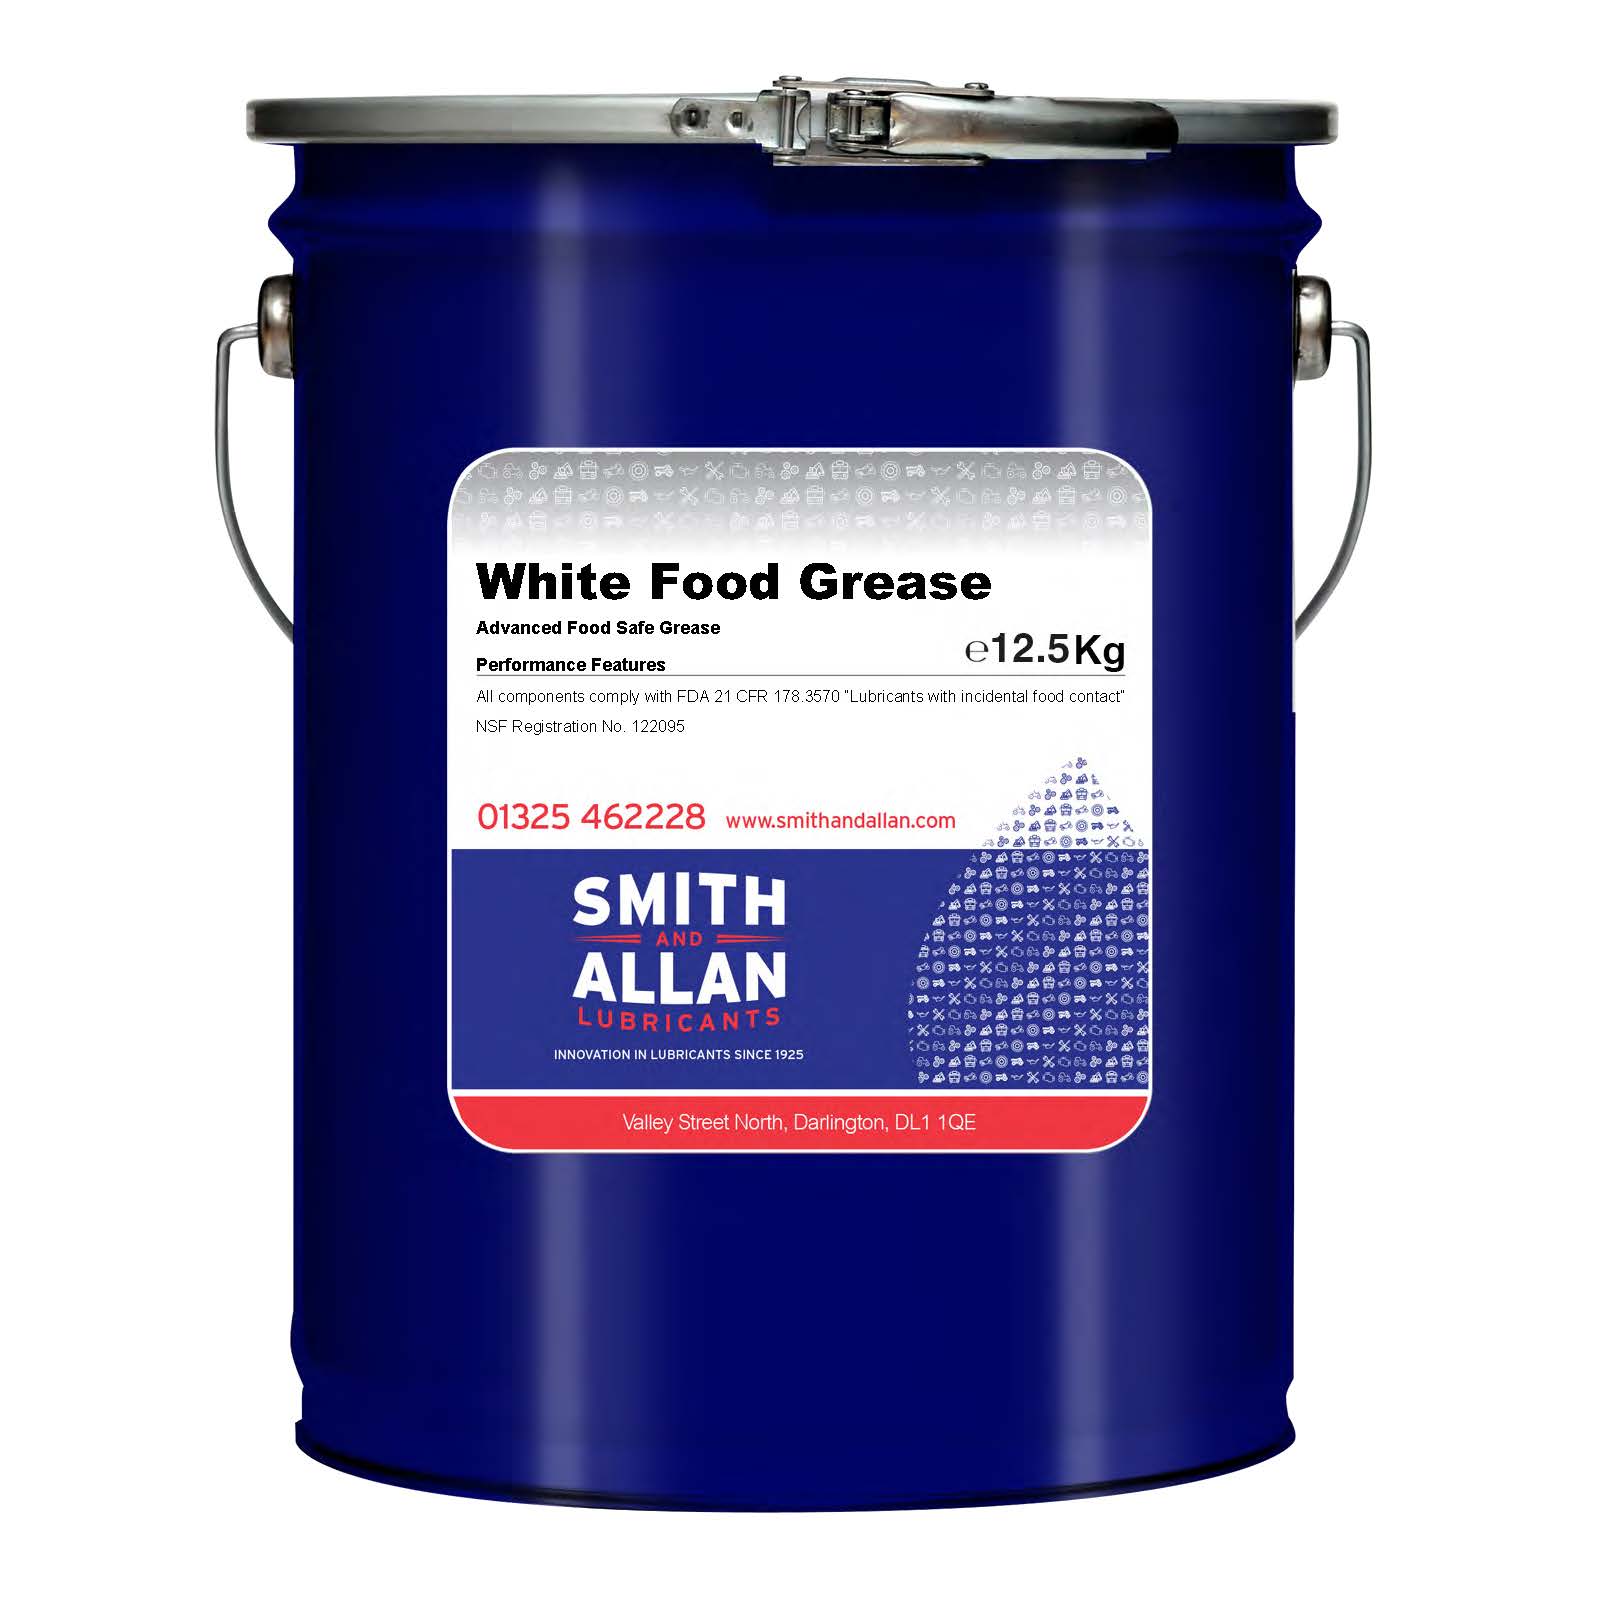 White Food Grease 12.5KG